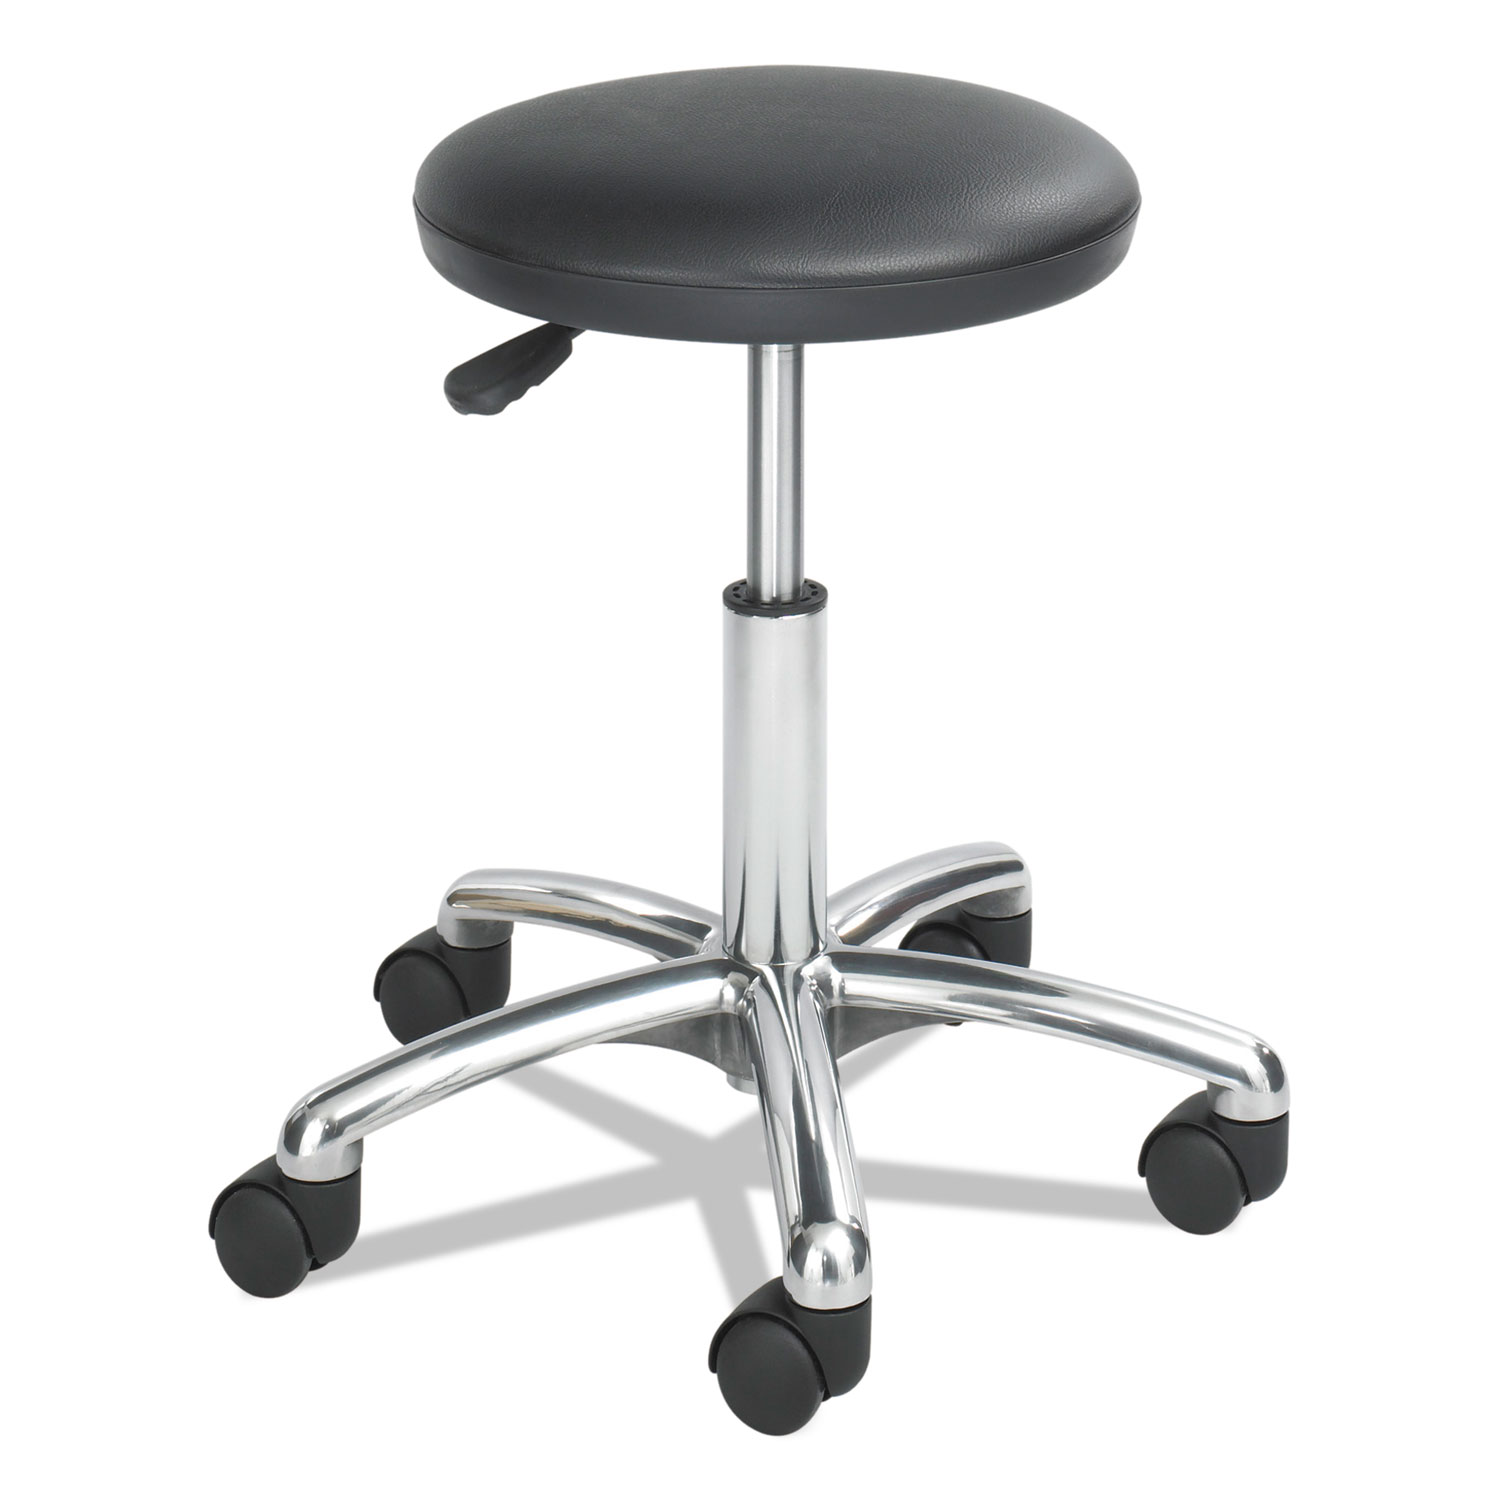  Safco 3434BL Height-Adjustable Lab Stool, 21 Seat Height, Supports up to 250 lbs., Black Seat/Black Back, Chrome Base (SAF3434BL) 